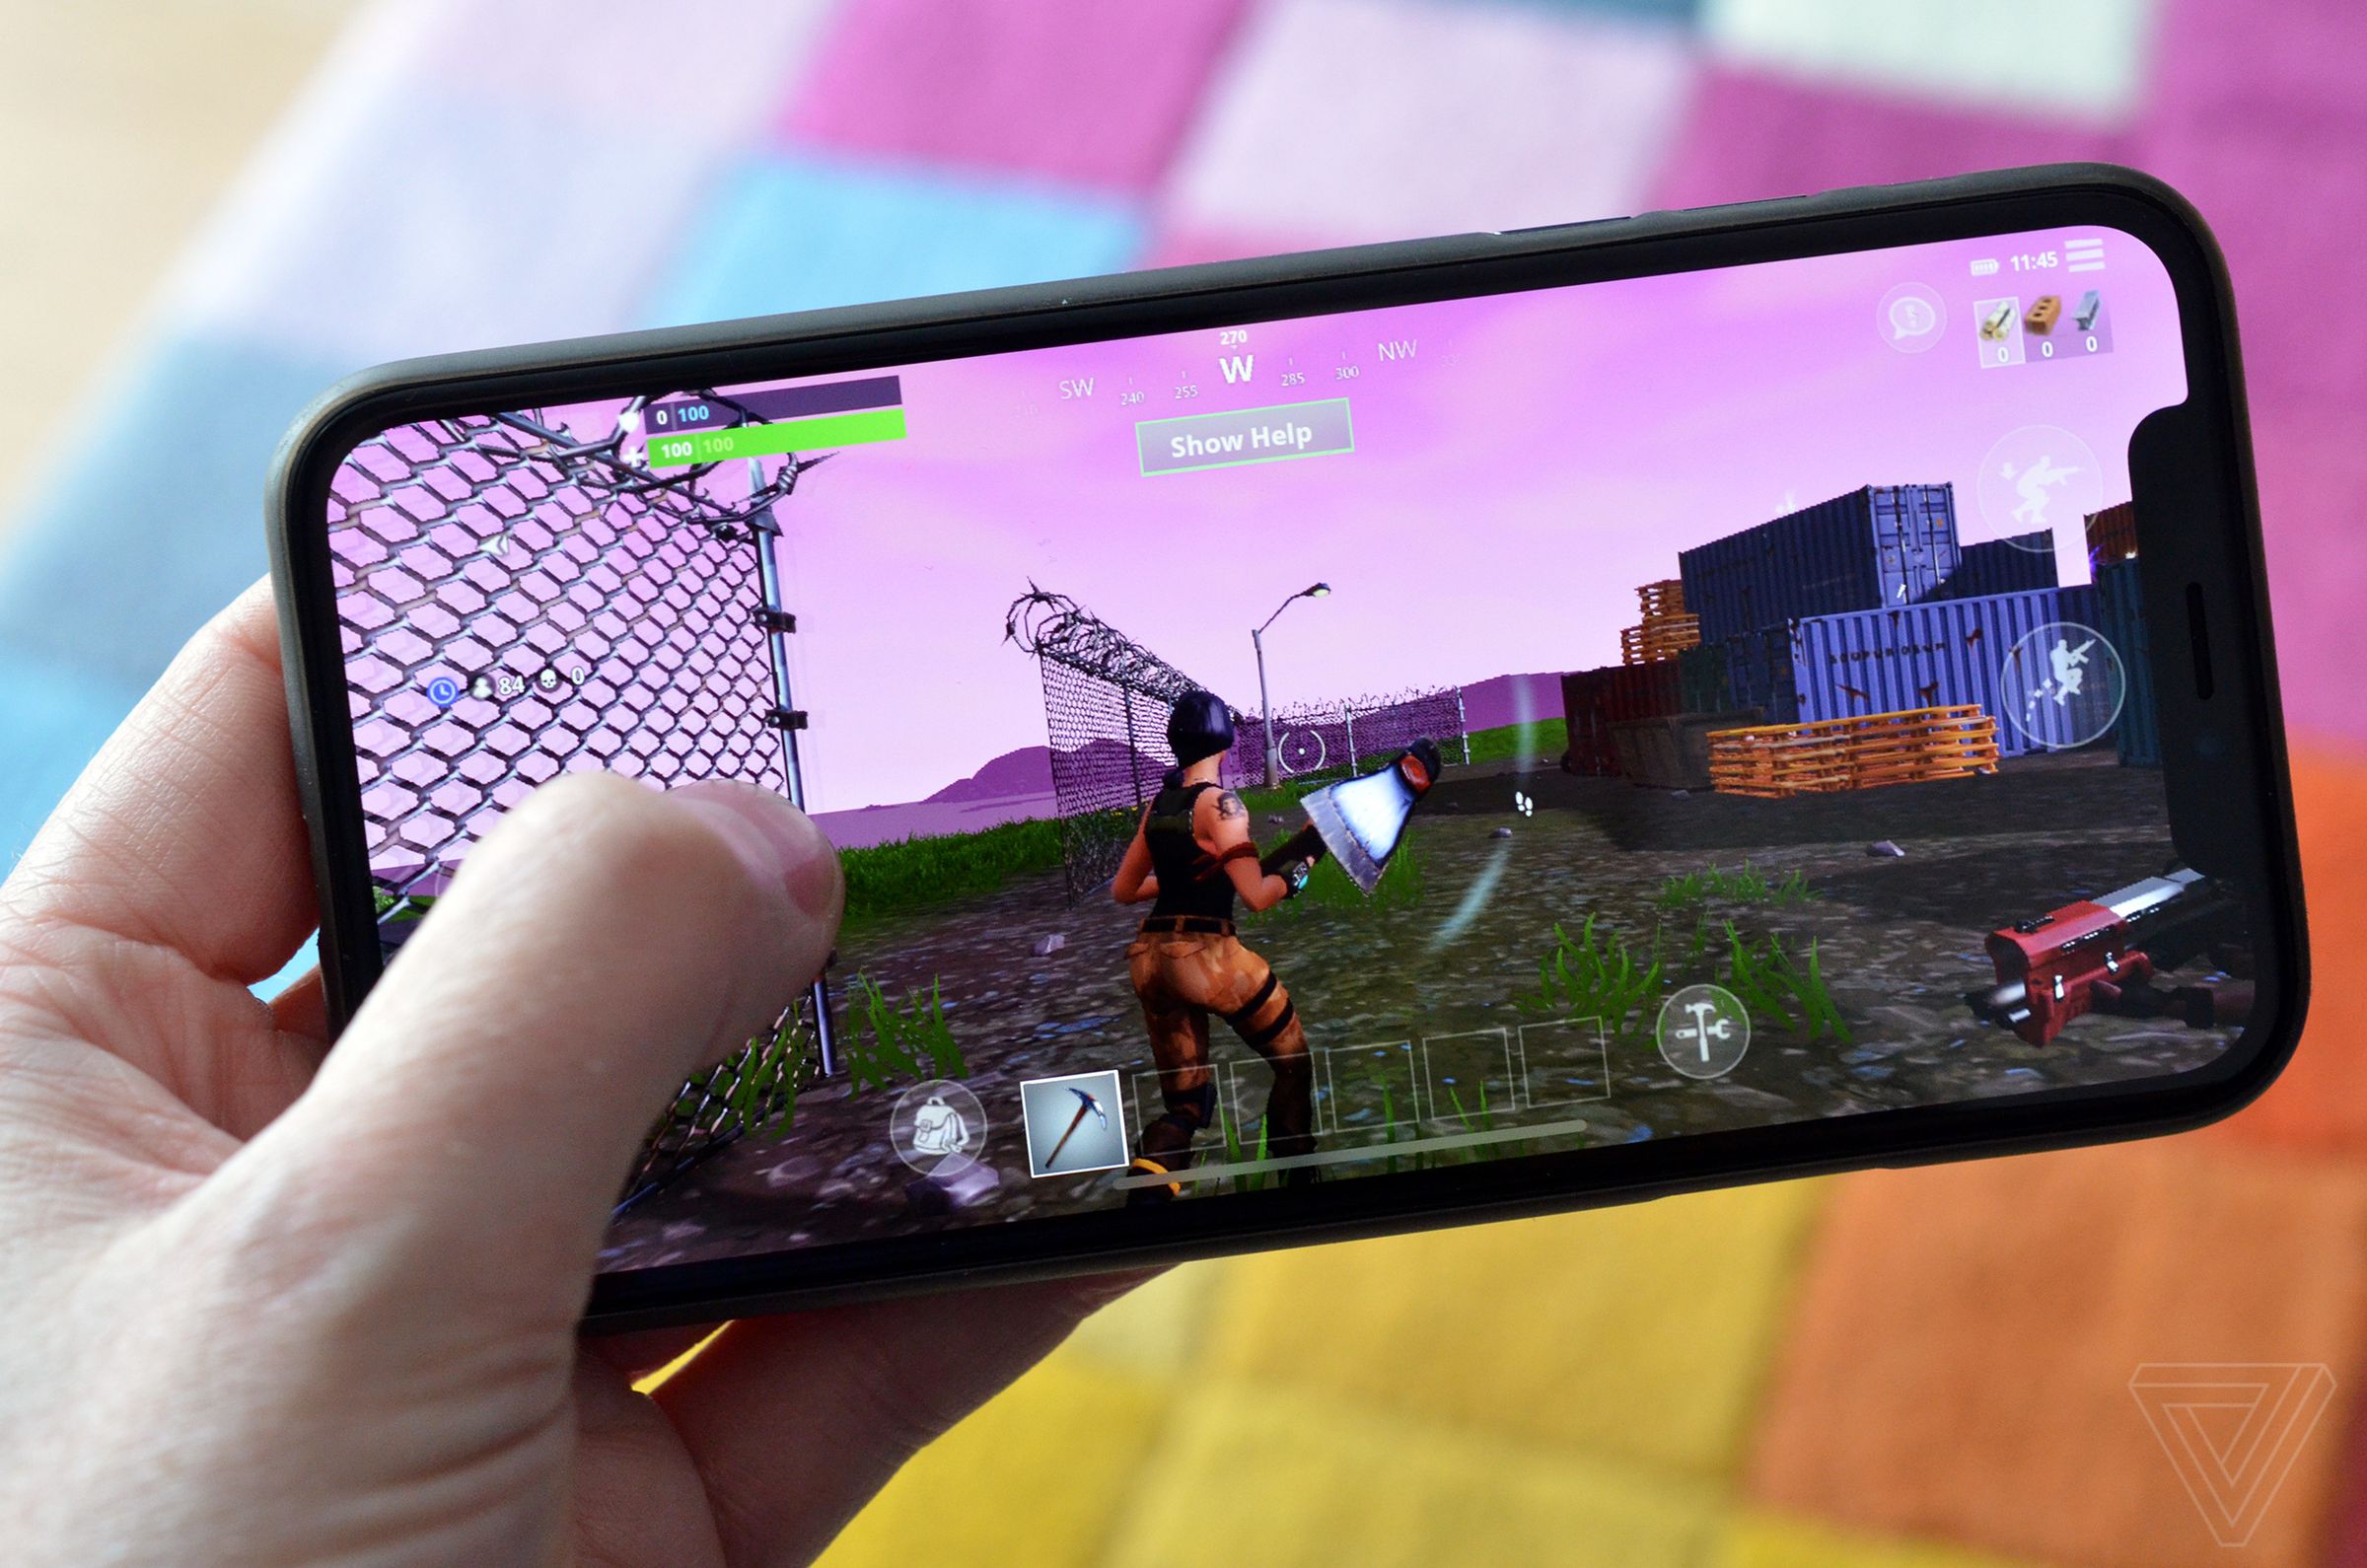 Fortnite running on an iPhone before its removal.